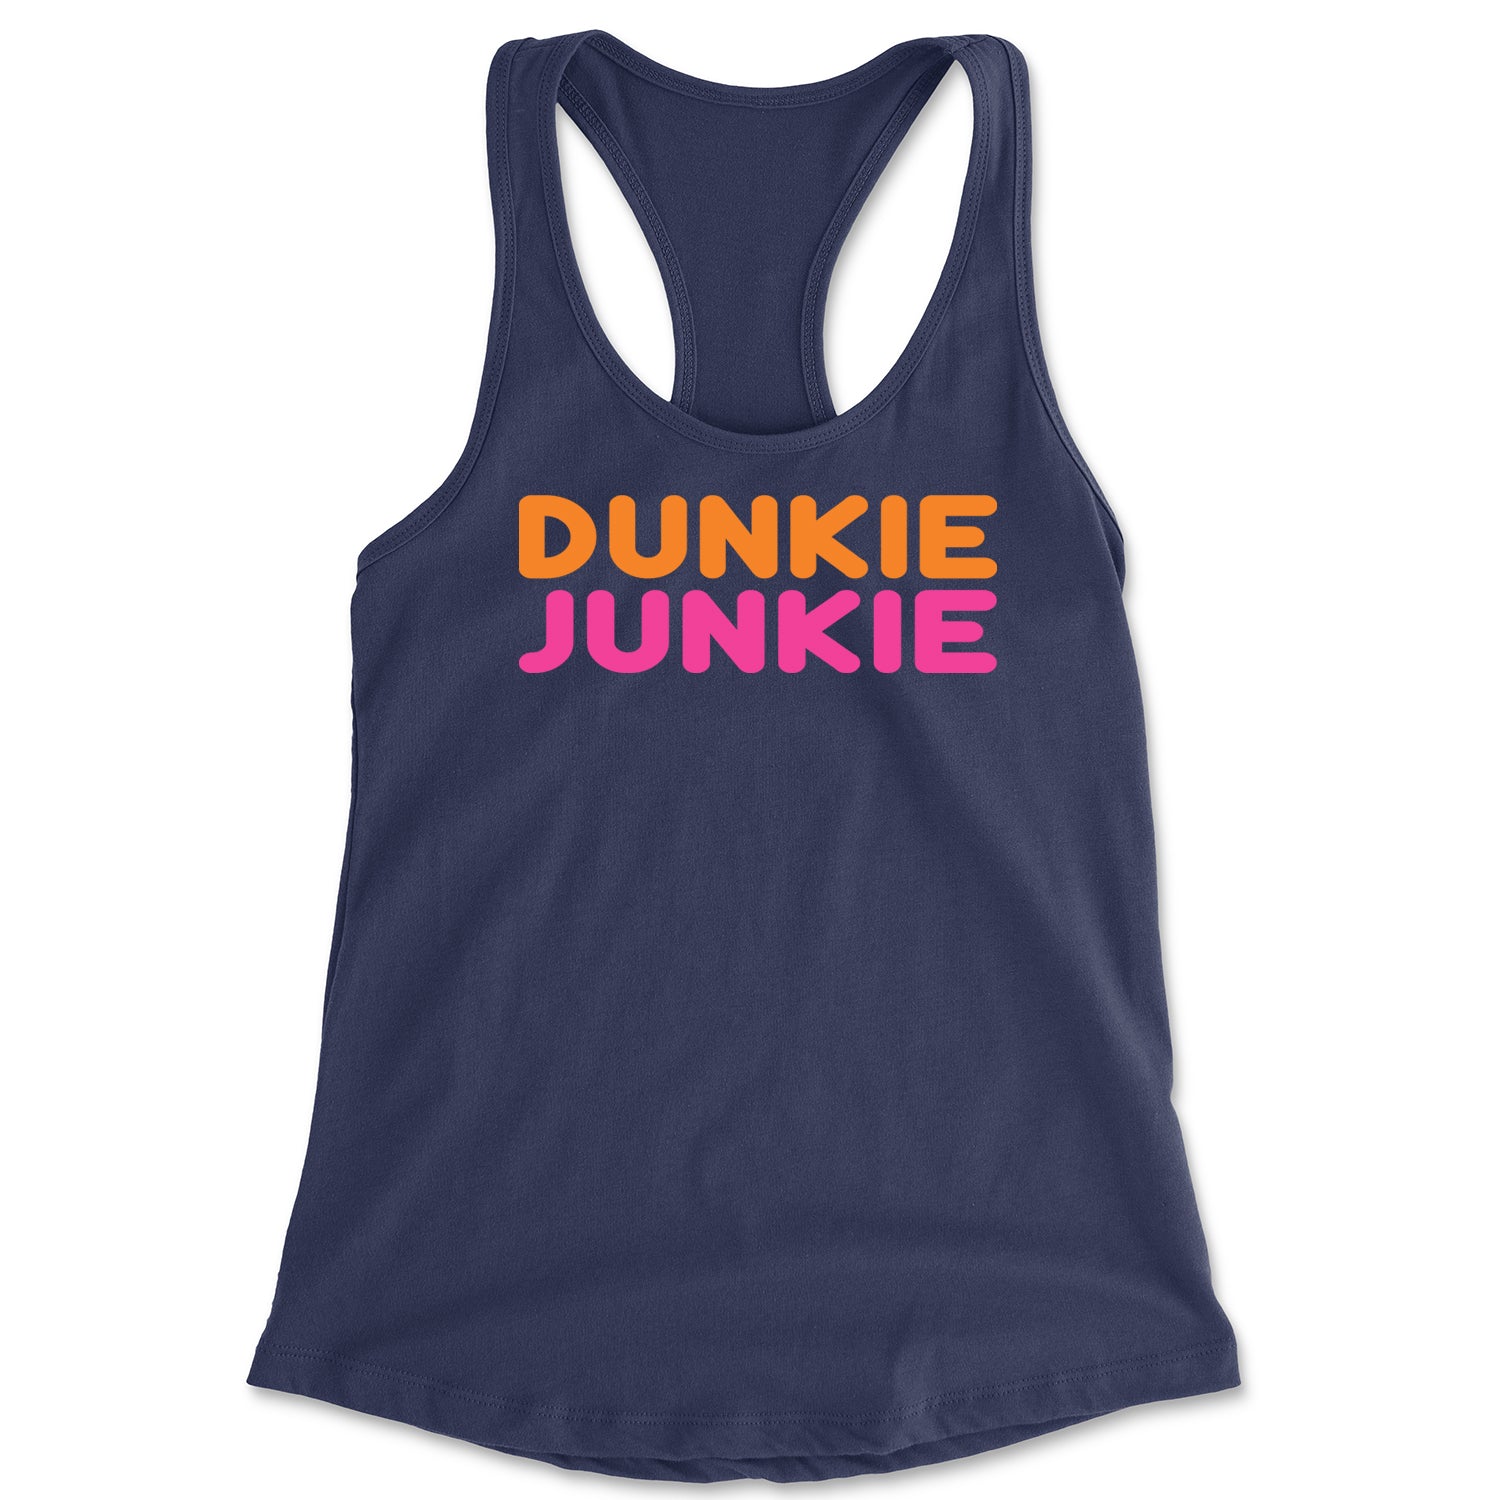 Dunkie Junkie Racerback Tank Top for Women addict, capuccino, coffee, dd, dnkn, dunkin, dunking, latte by Expression Tees